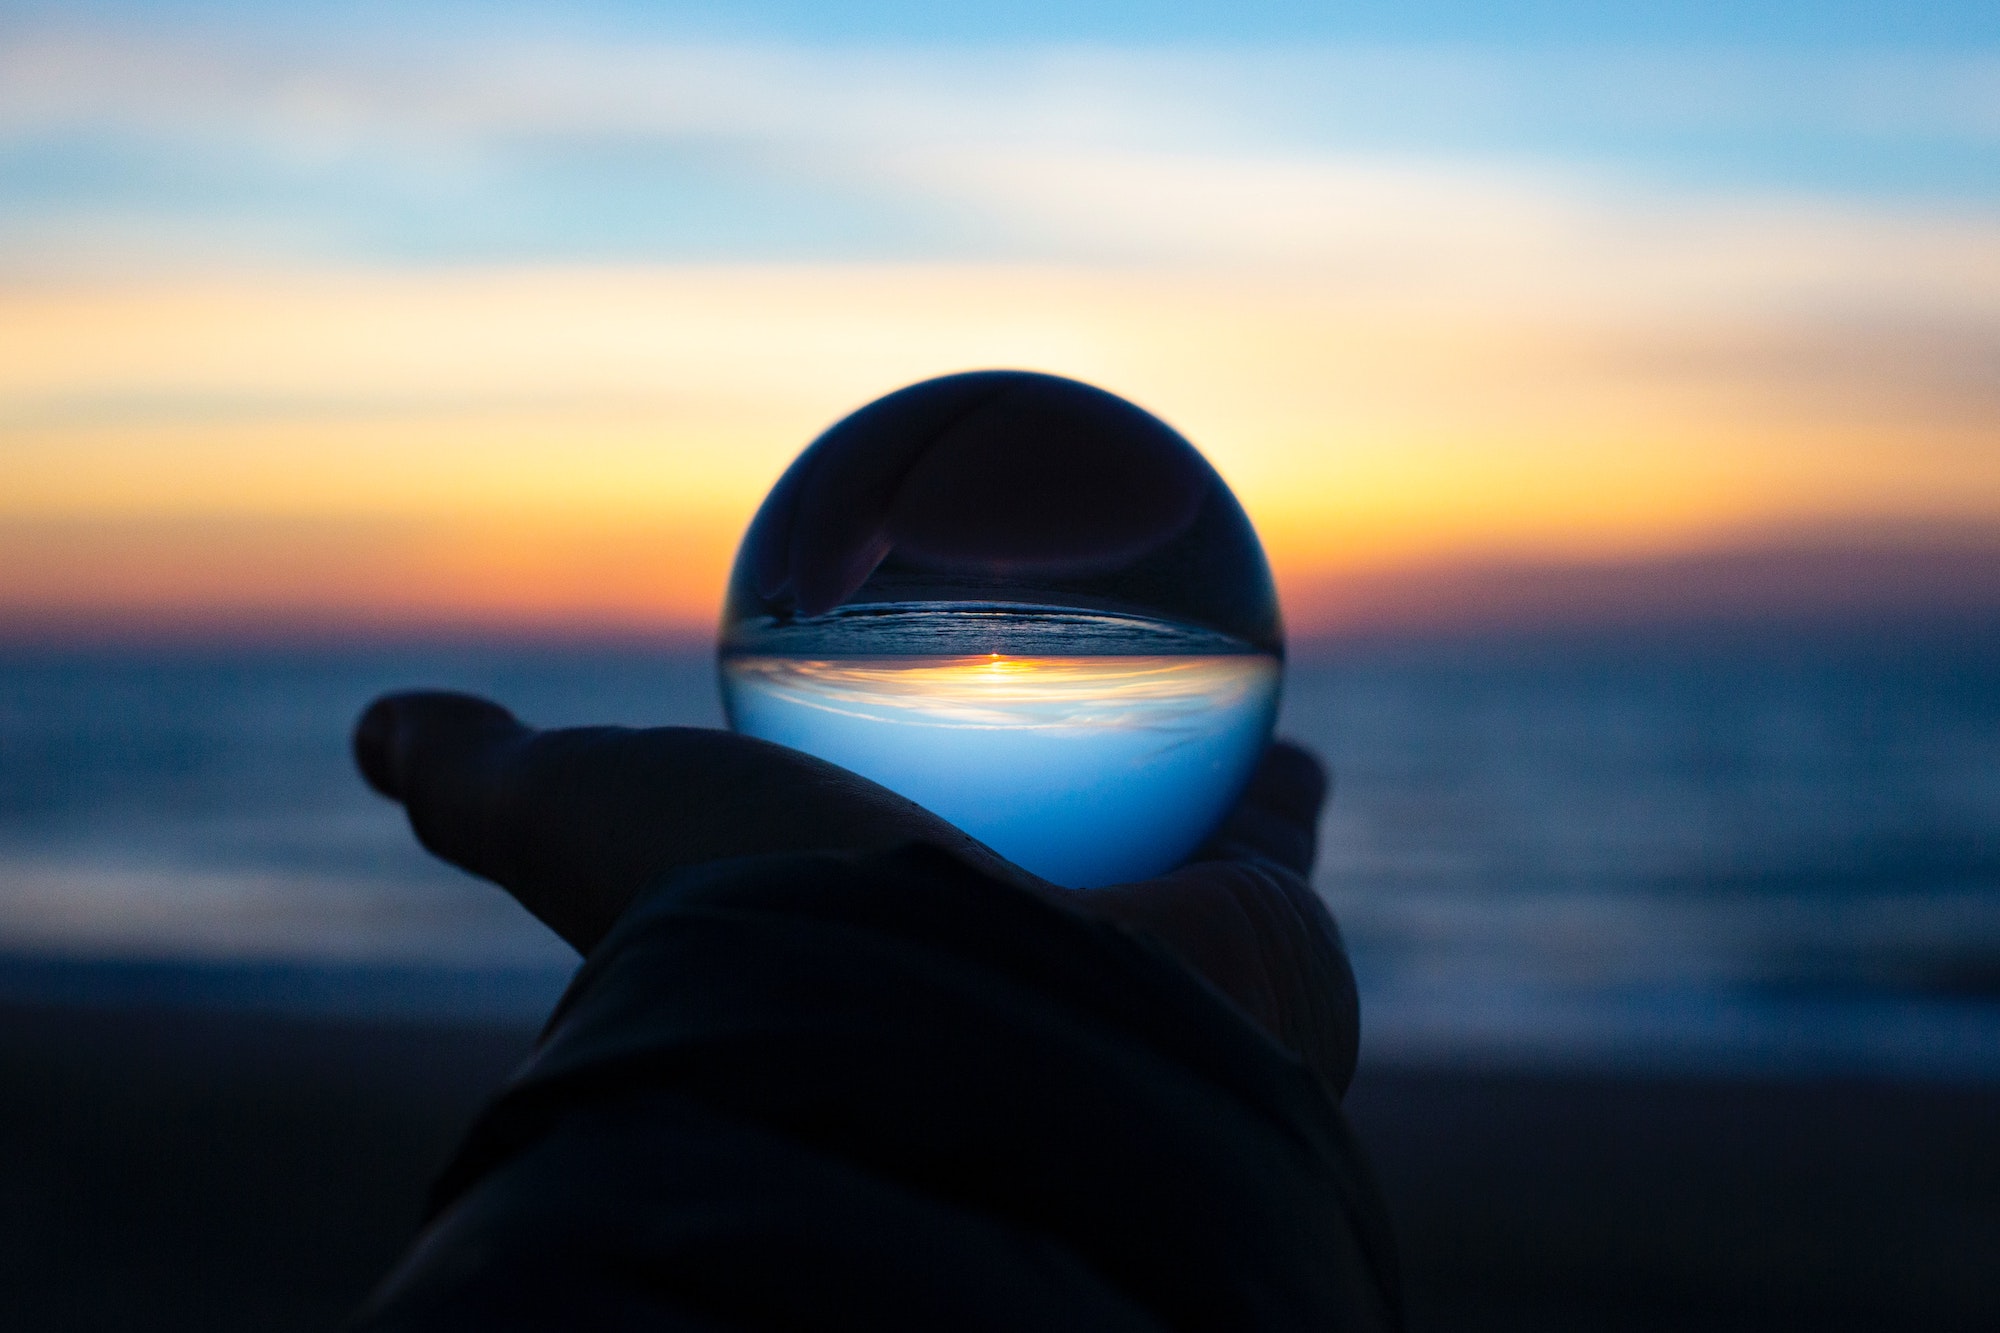 A hand holding a crystal ball with the sunset in the background